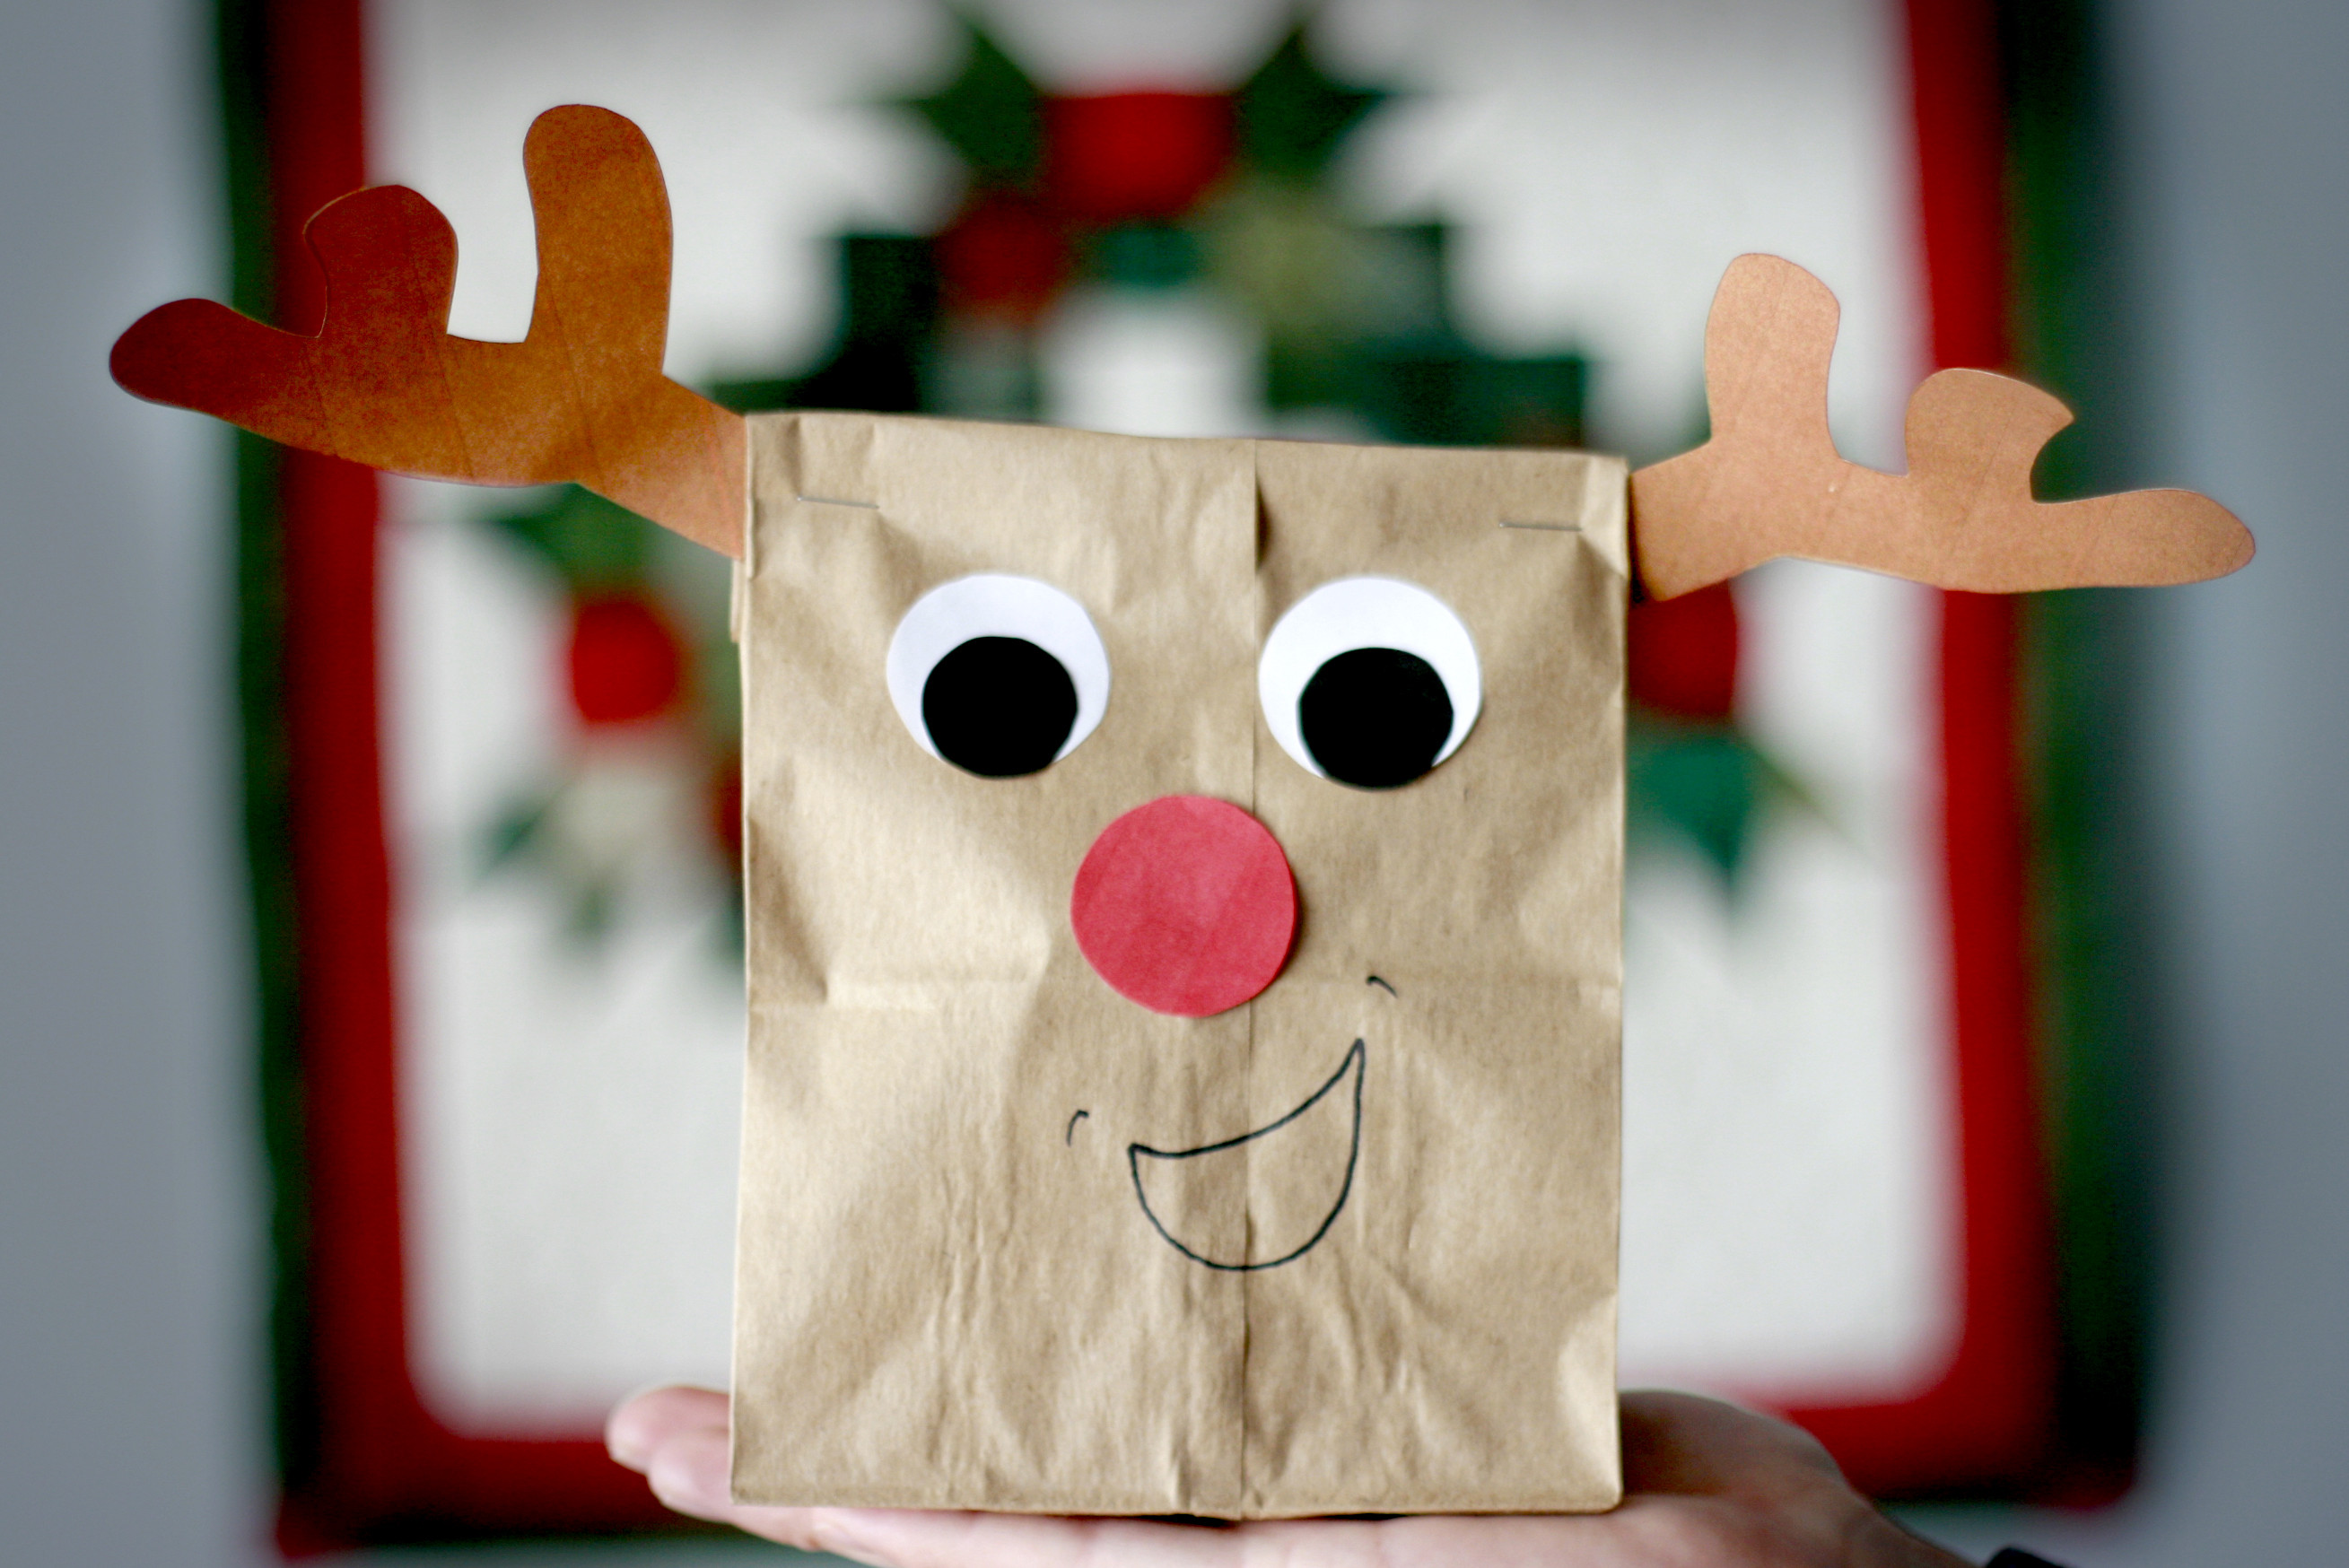 Christmas Gift Crafts For Toddlers
 Last Minute Christmas Gifts for Kids and Adults